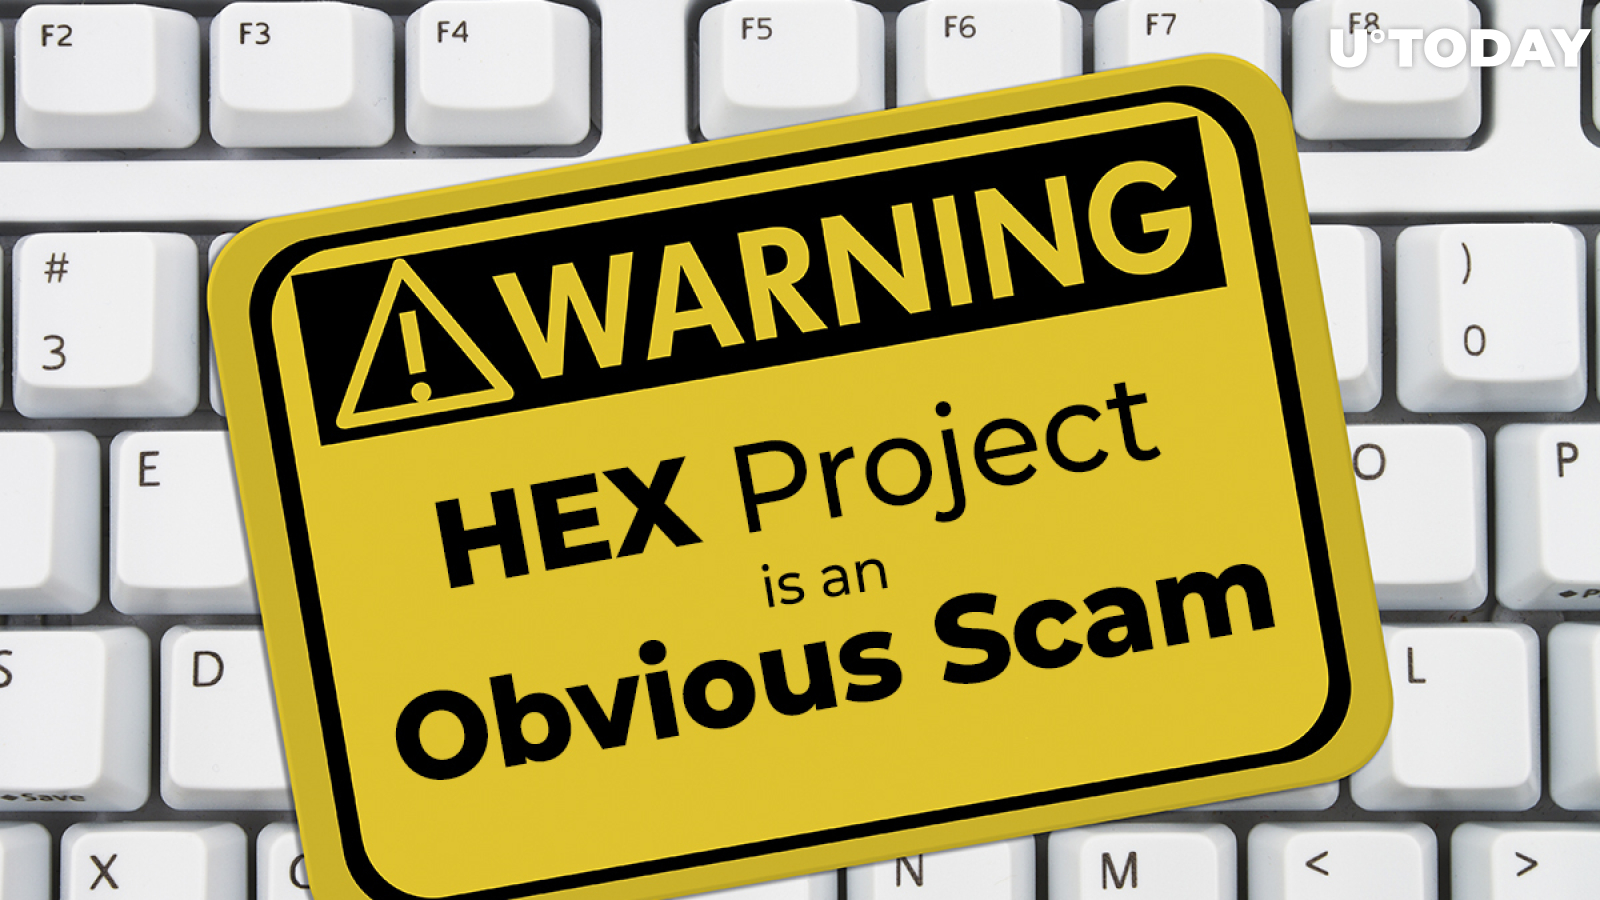 HEX Project is an Obvious Scam: IOTA Founder. Crypto Community Seconds